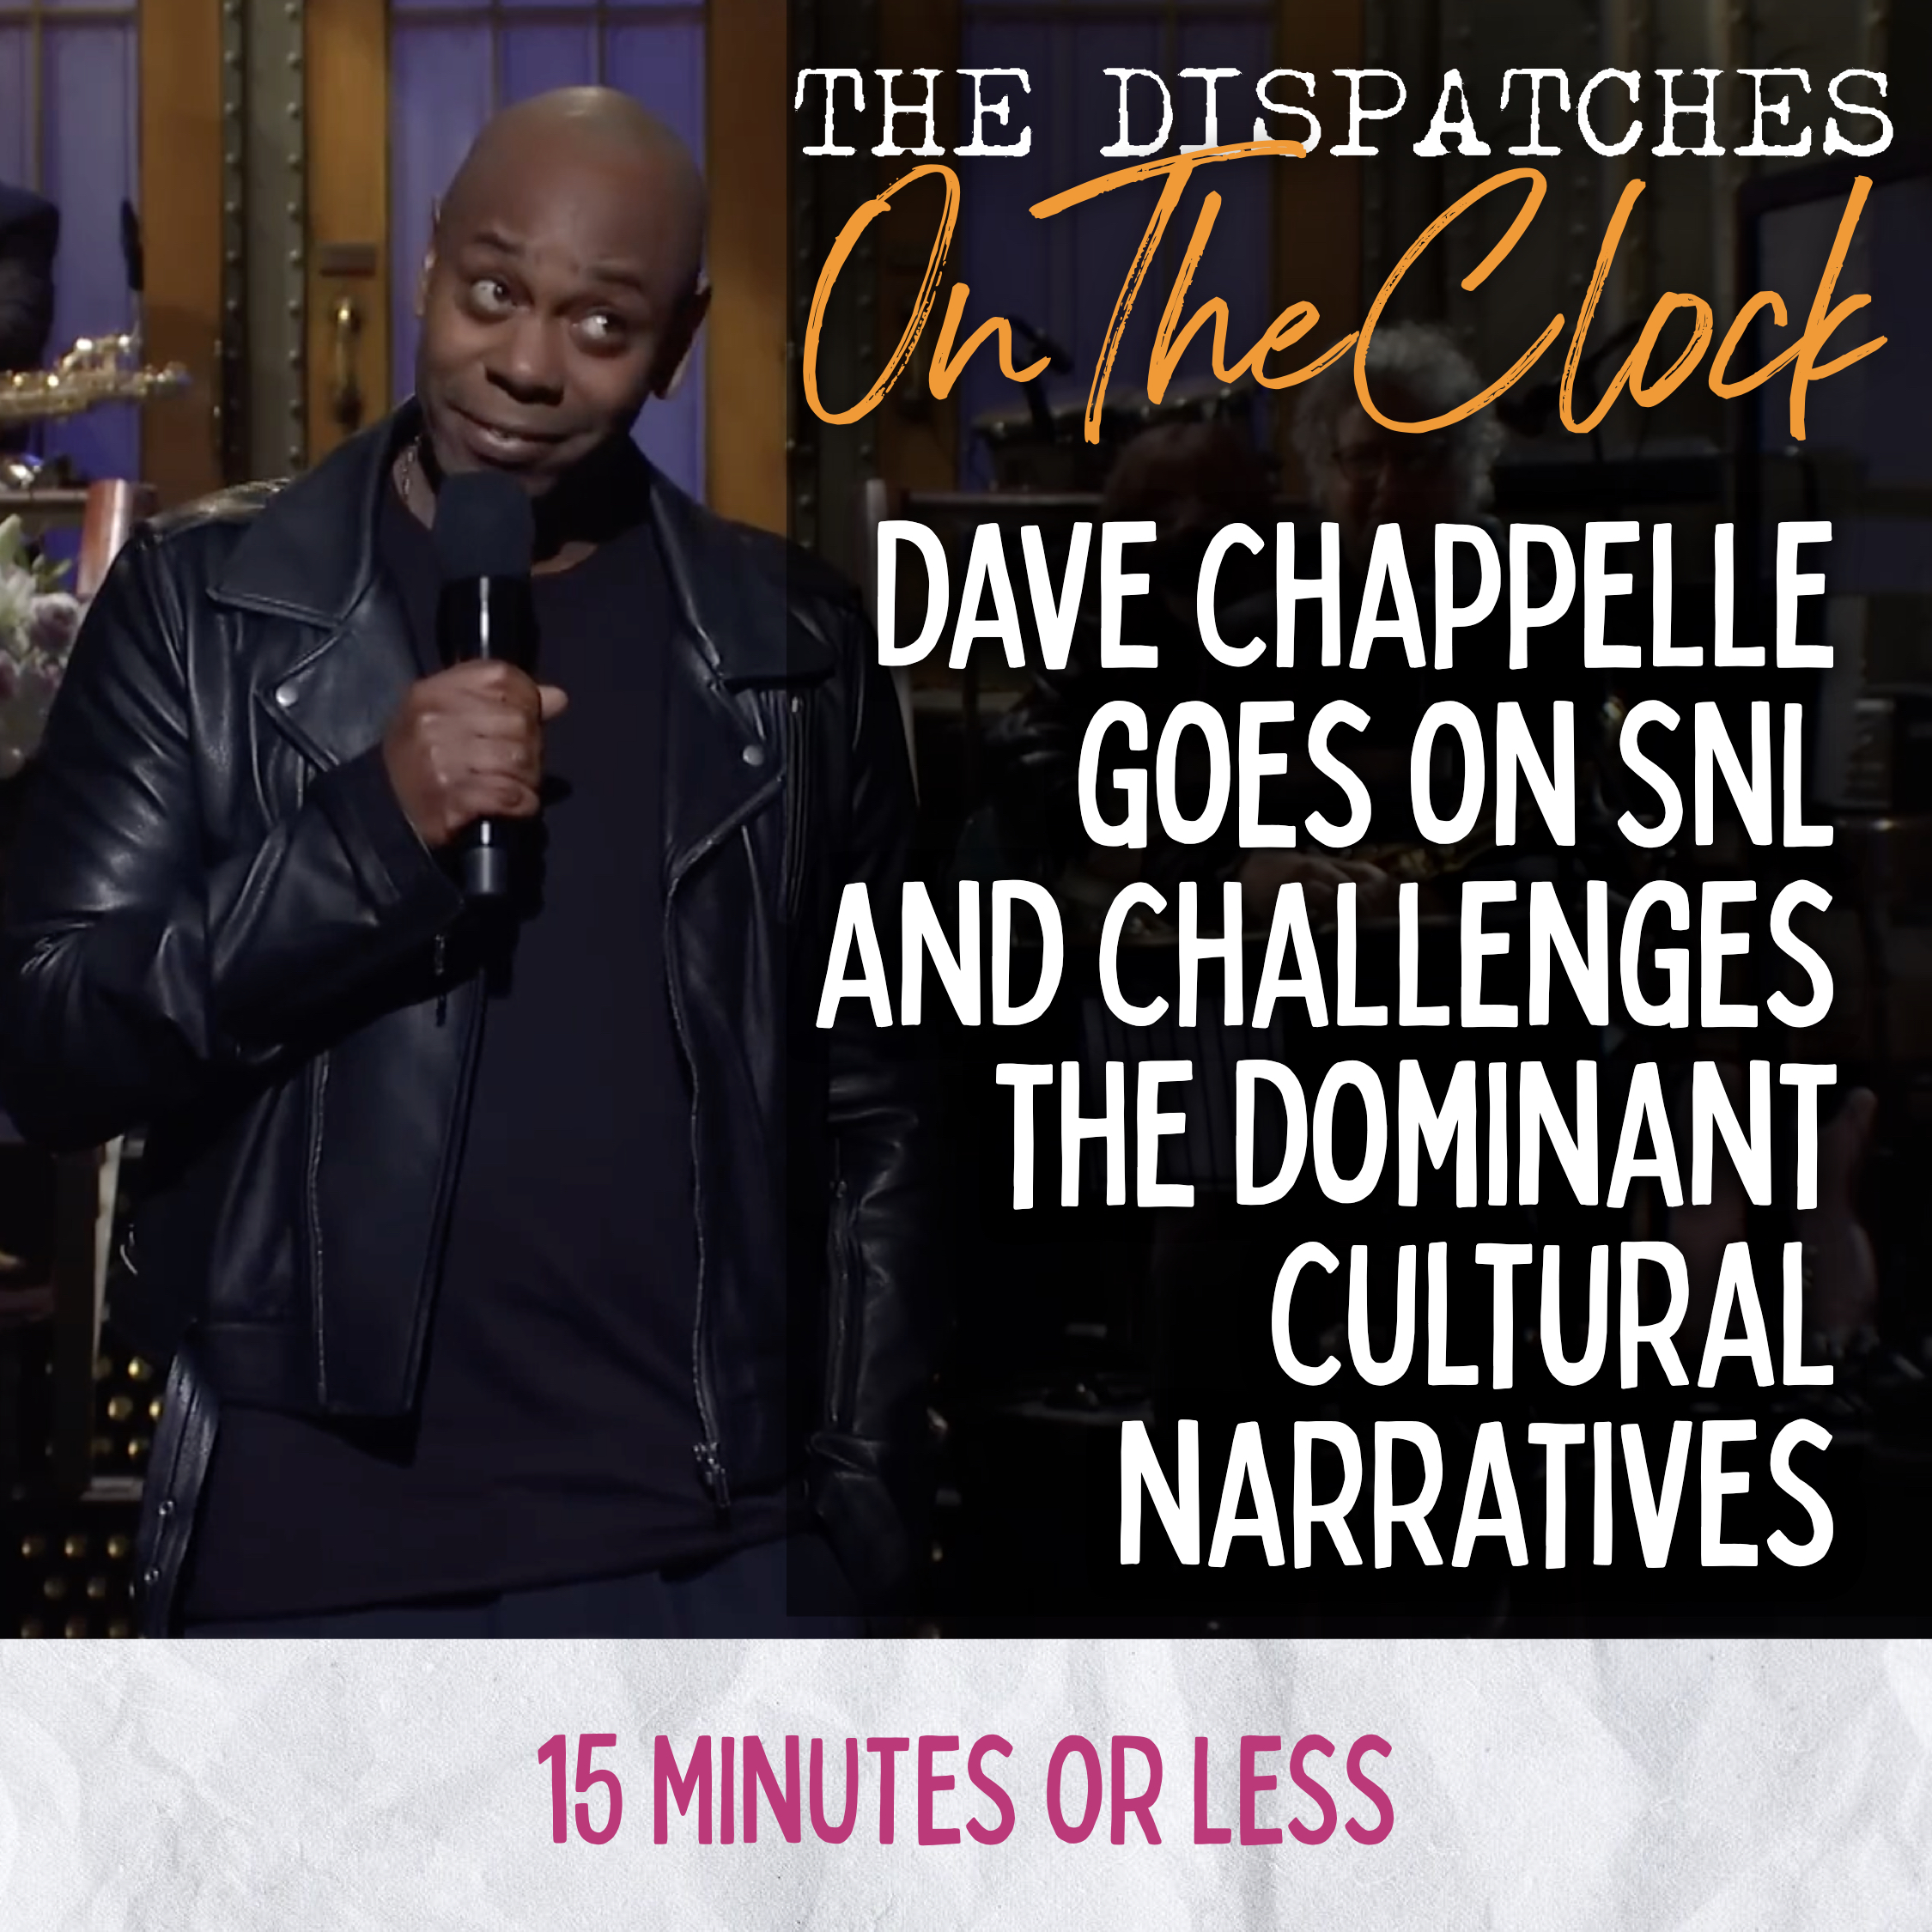 ON THE CLOCK | Dave Chappelle Goes on SNL and Challenges the Dominant the Cultural Narratives